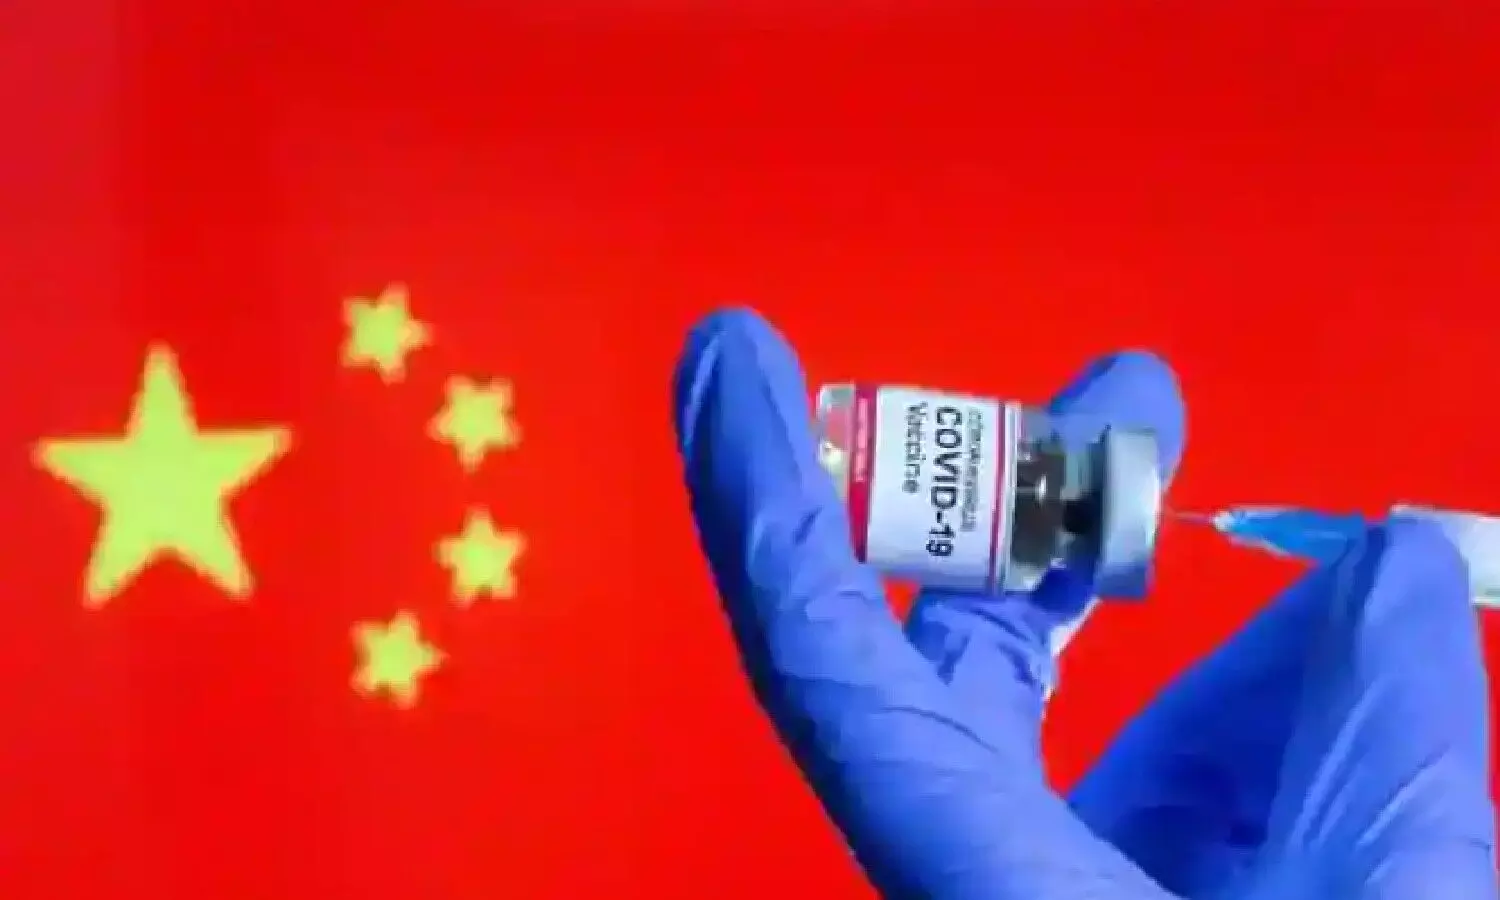 About 35 million people are being vaccinated daily in the world and more than half of them are from China.